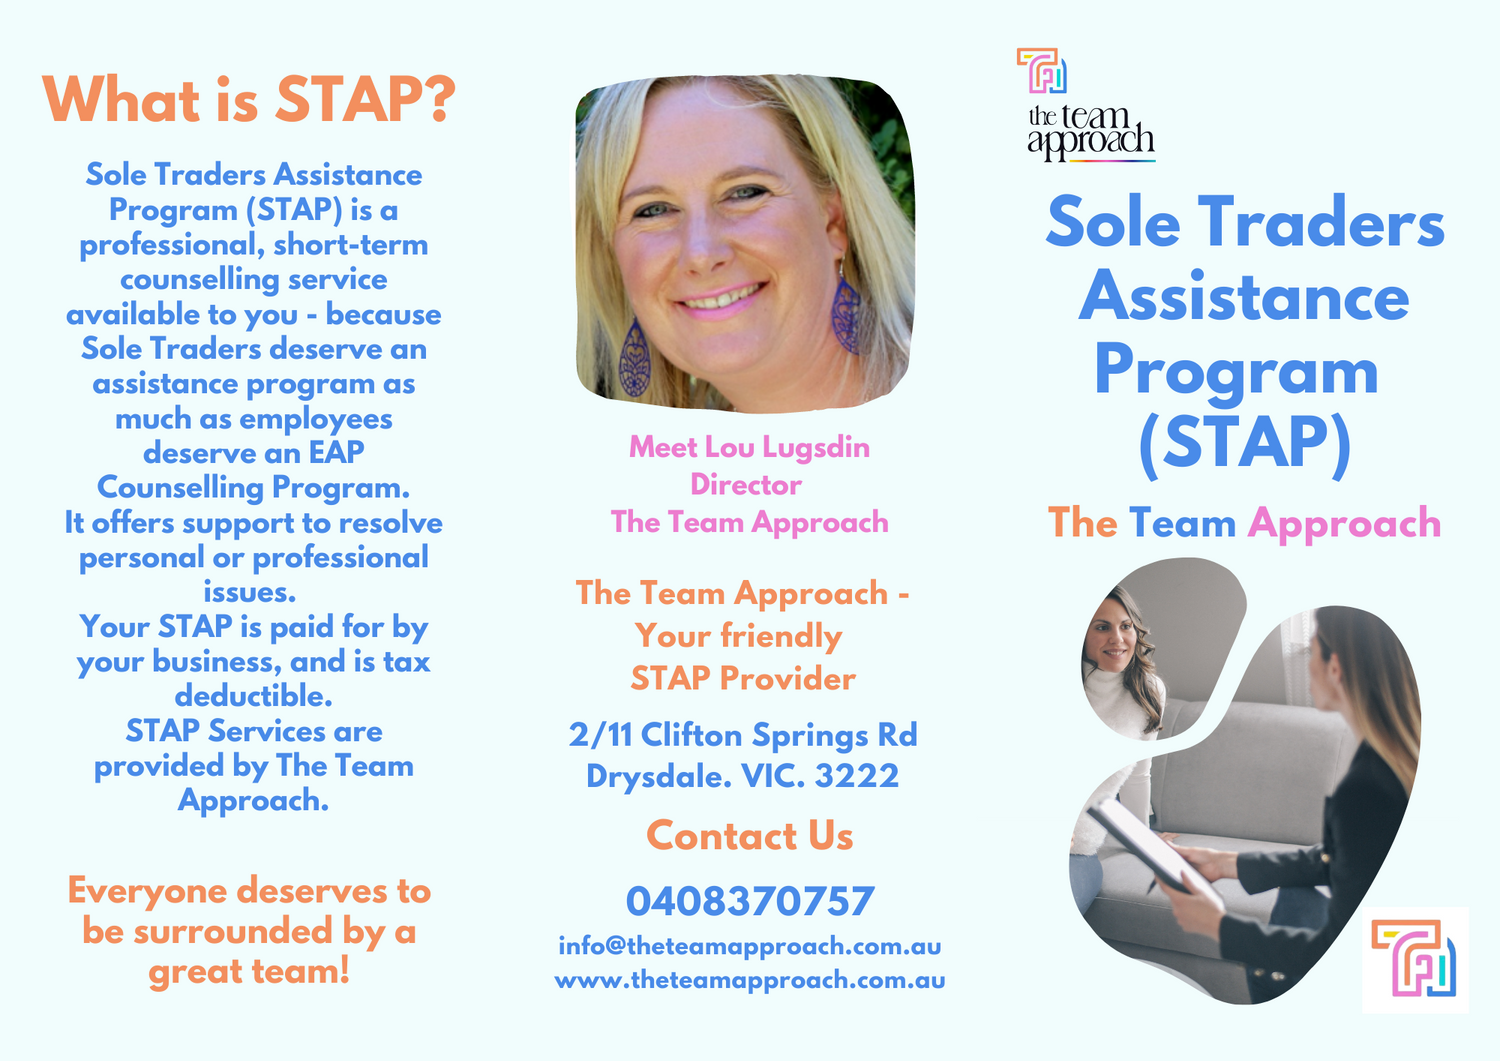 Gallery Photo of Sole Trader Assistance Program - Our newest program!